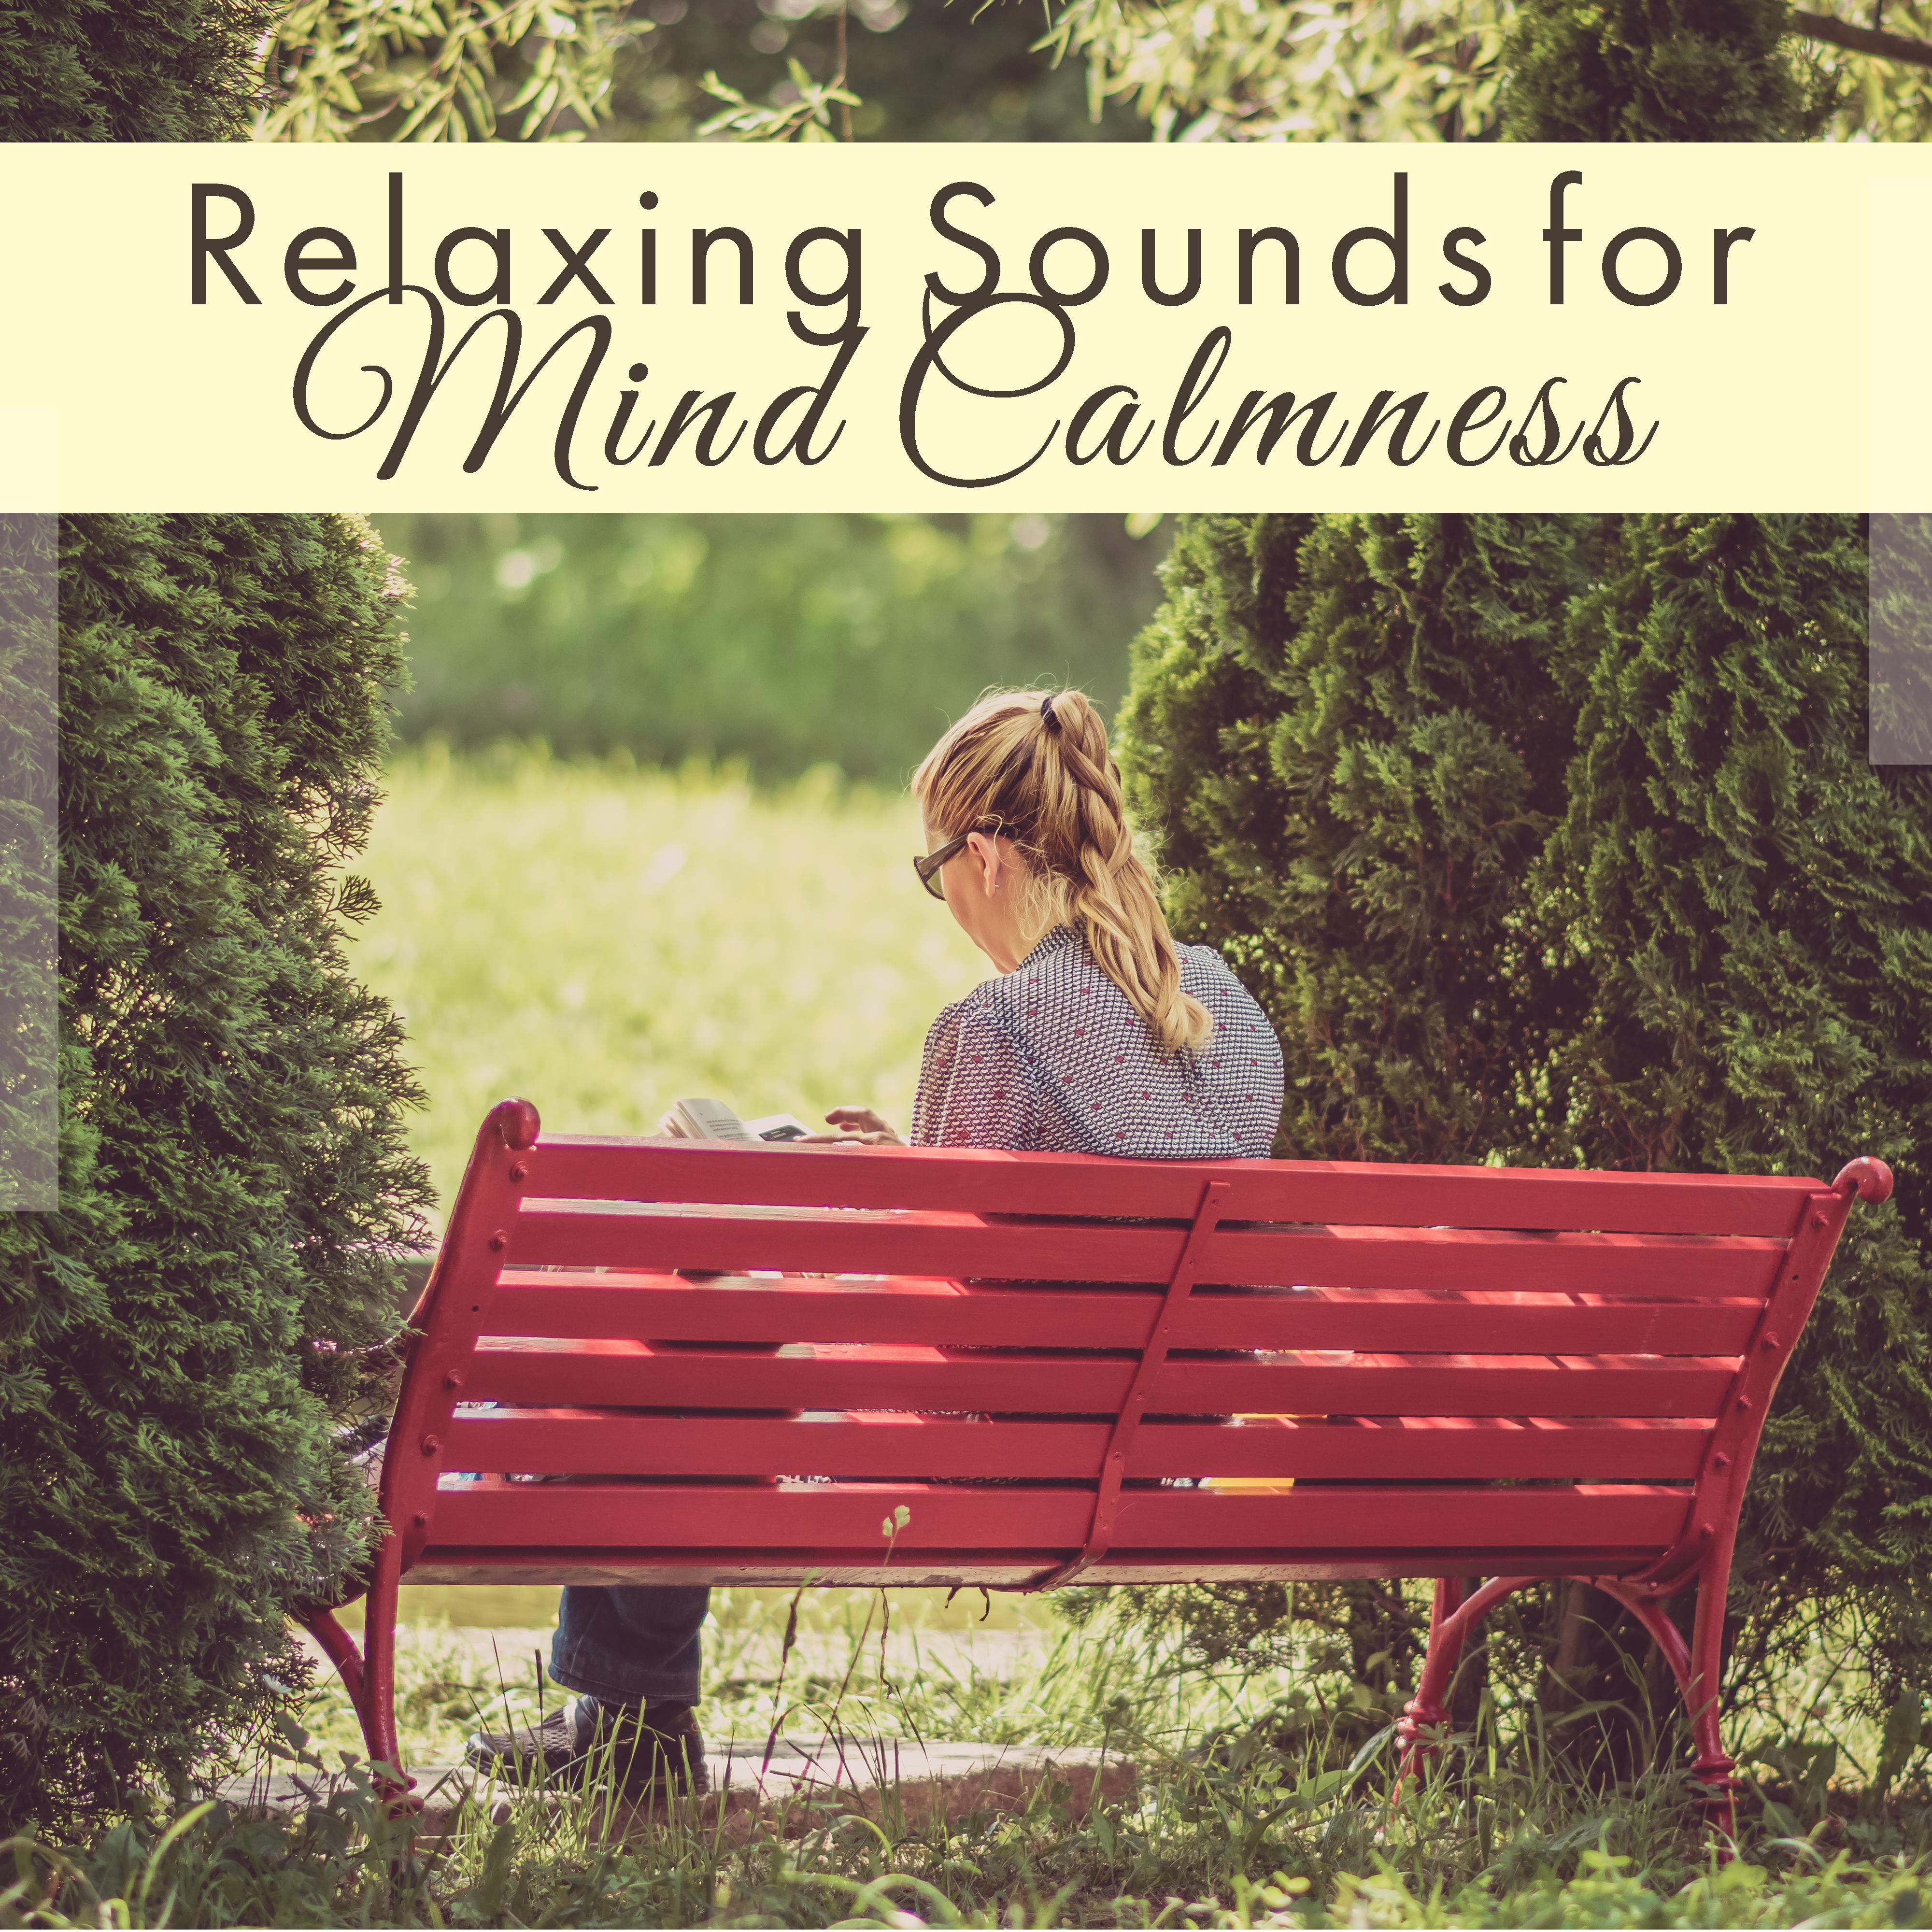 Relaxing Sounds for Mind Calmness  Soft Sounds, Easy Listening, Peaceful Beats, Stress Relieve, Healing Therapy